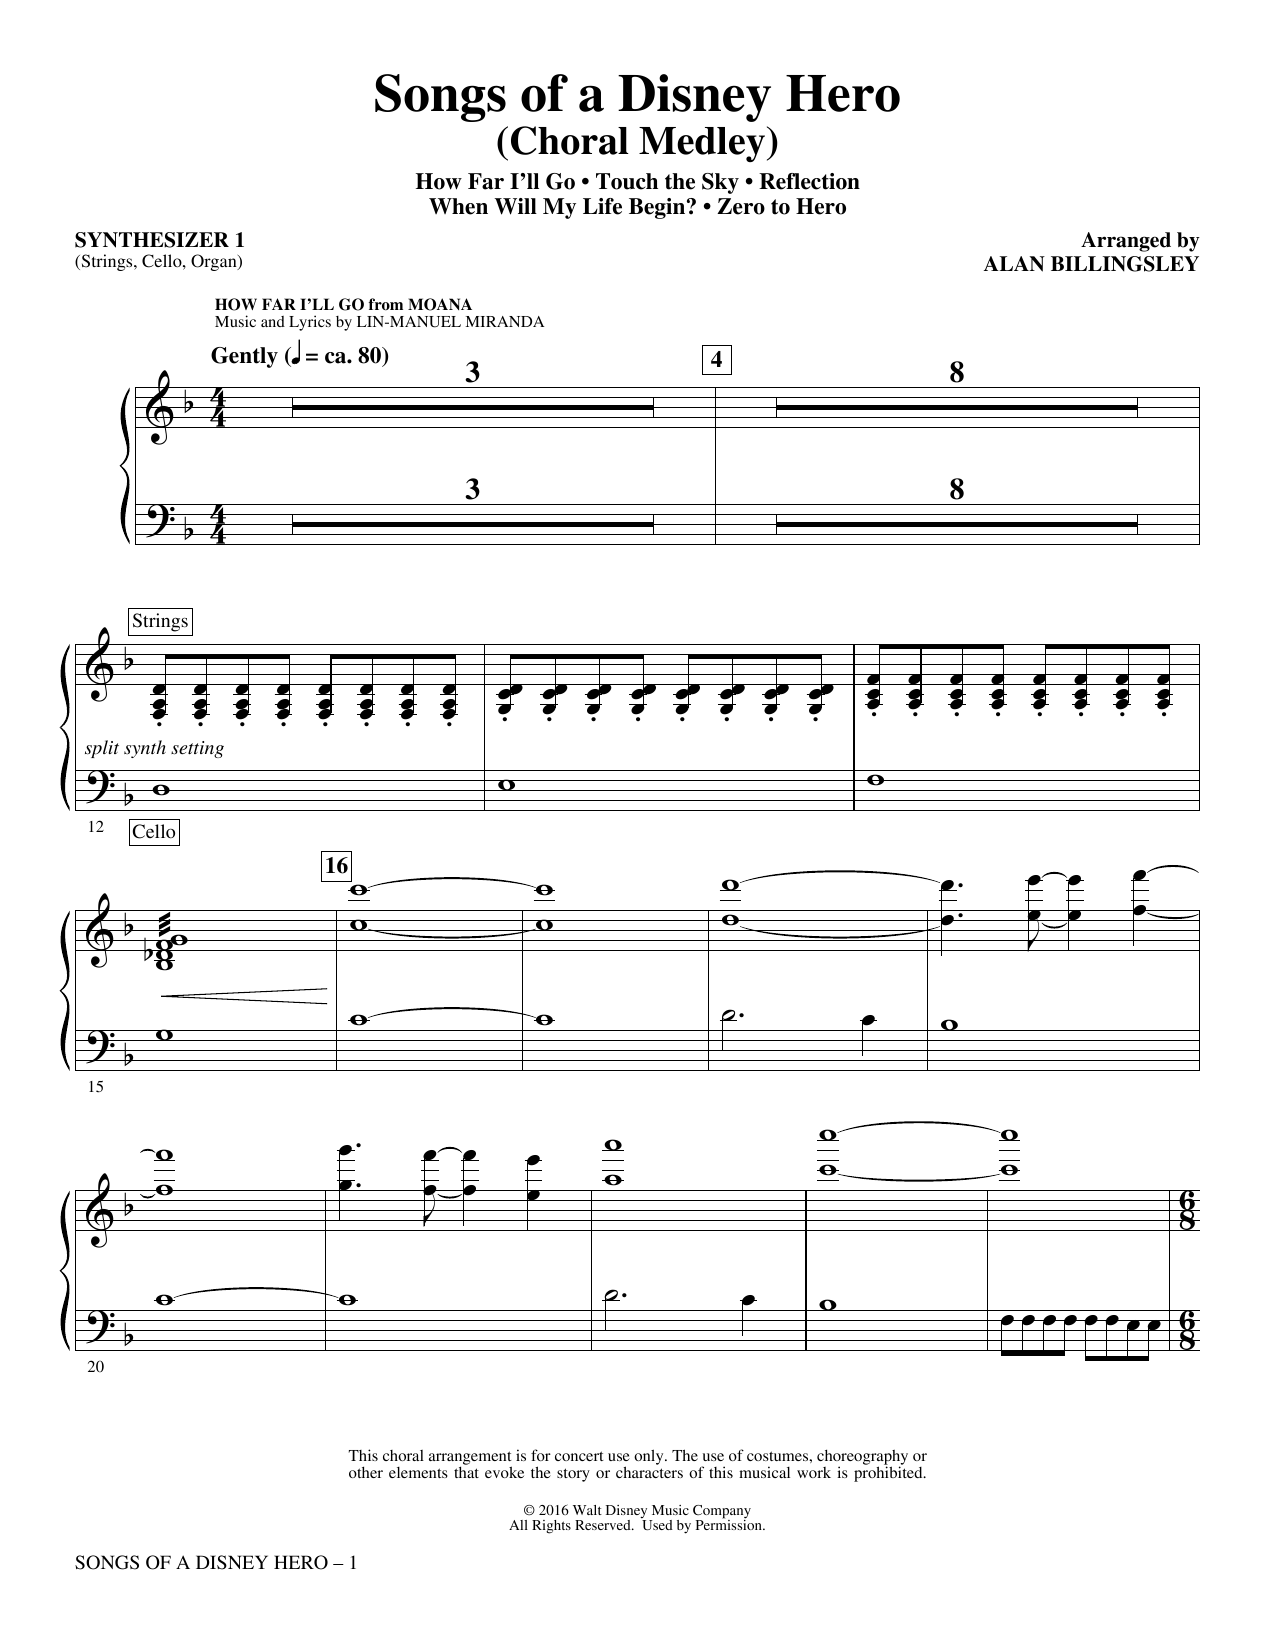 Songs of a Disney Hero - Synthesizer I sheet music